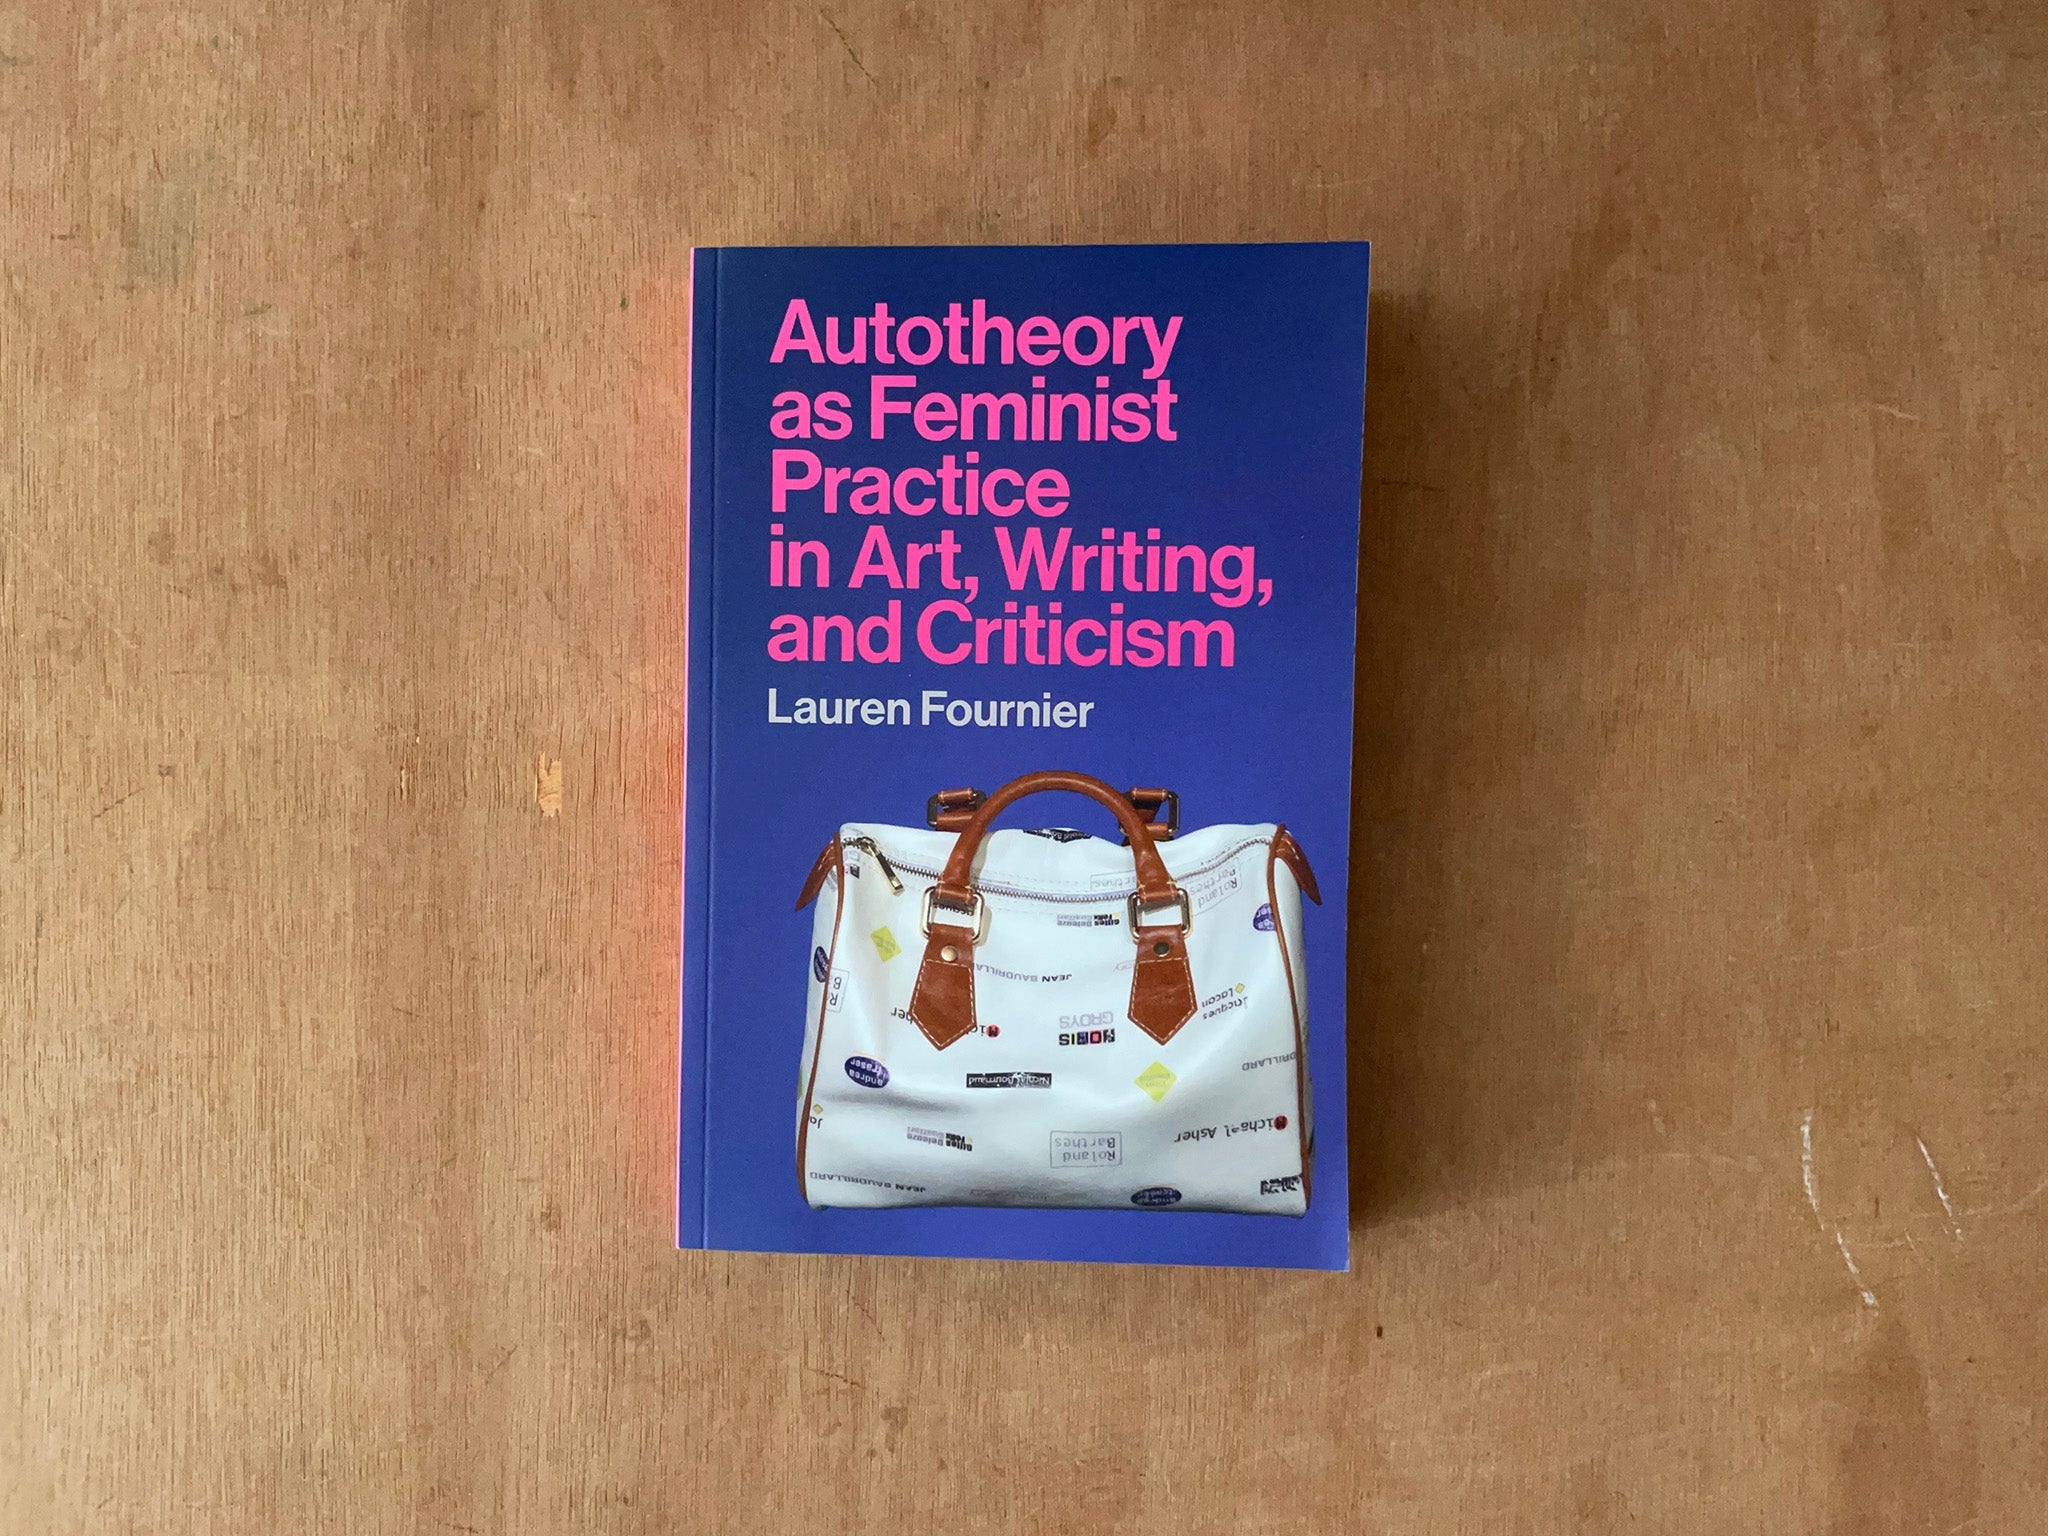 AUTOTHEORY AS FEMINIST PRACTICE IN ART, WRITING, AND CRITICISM by Lauren Fournier